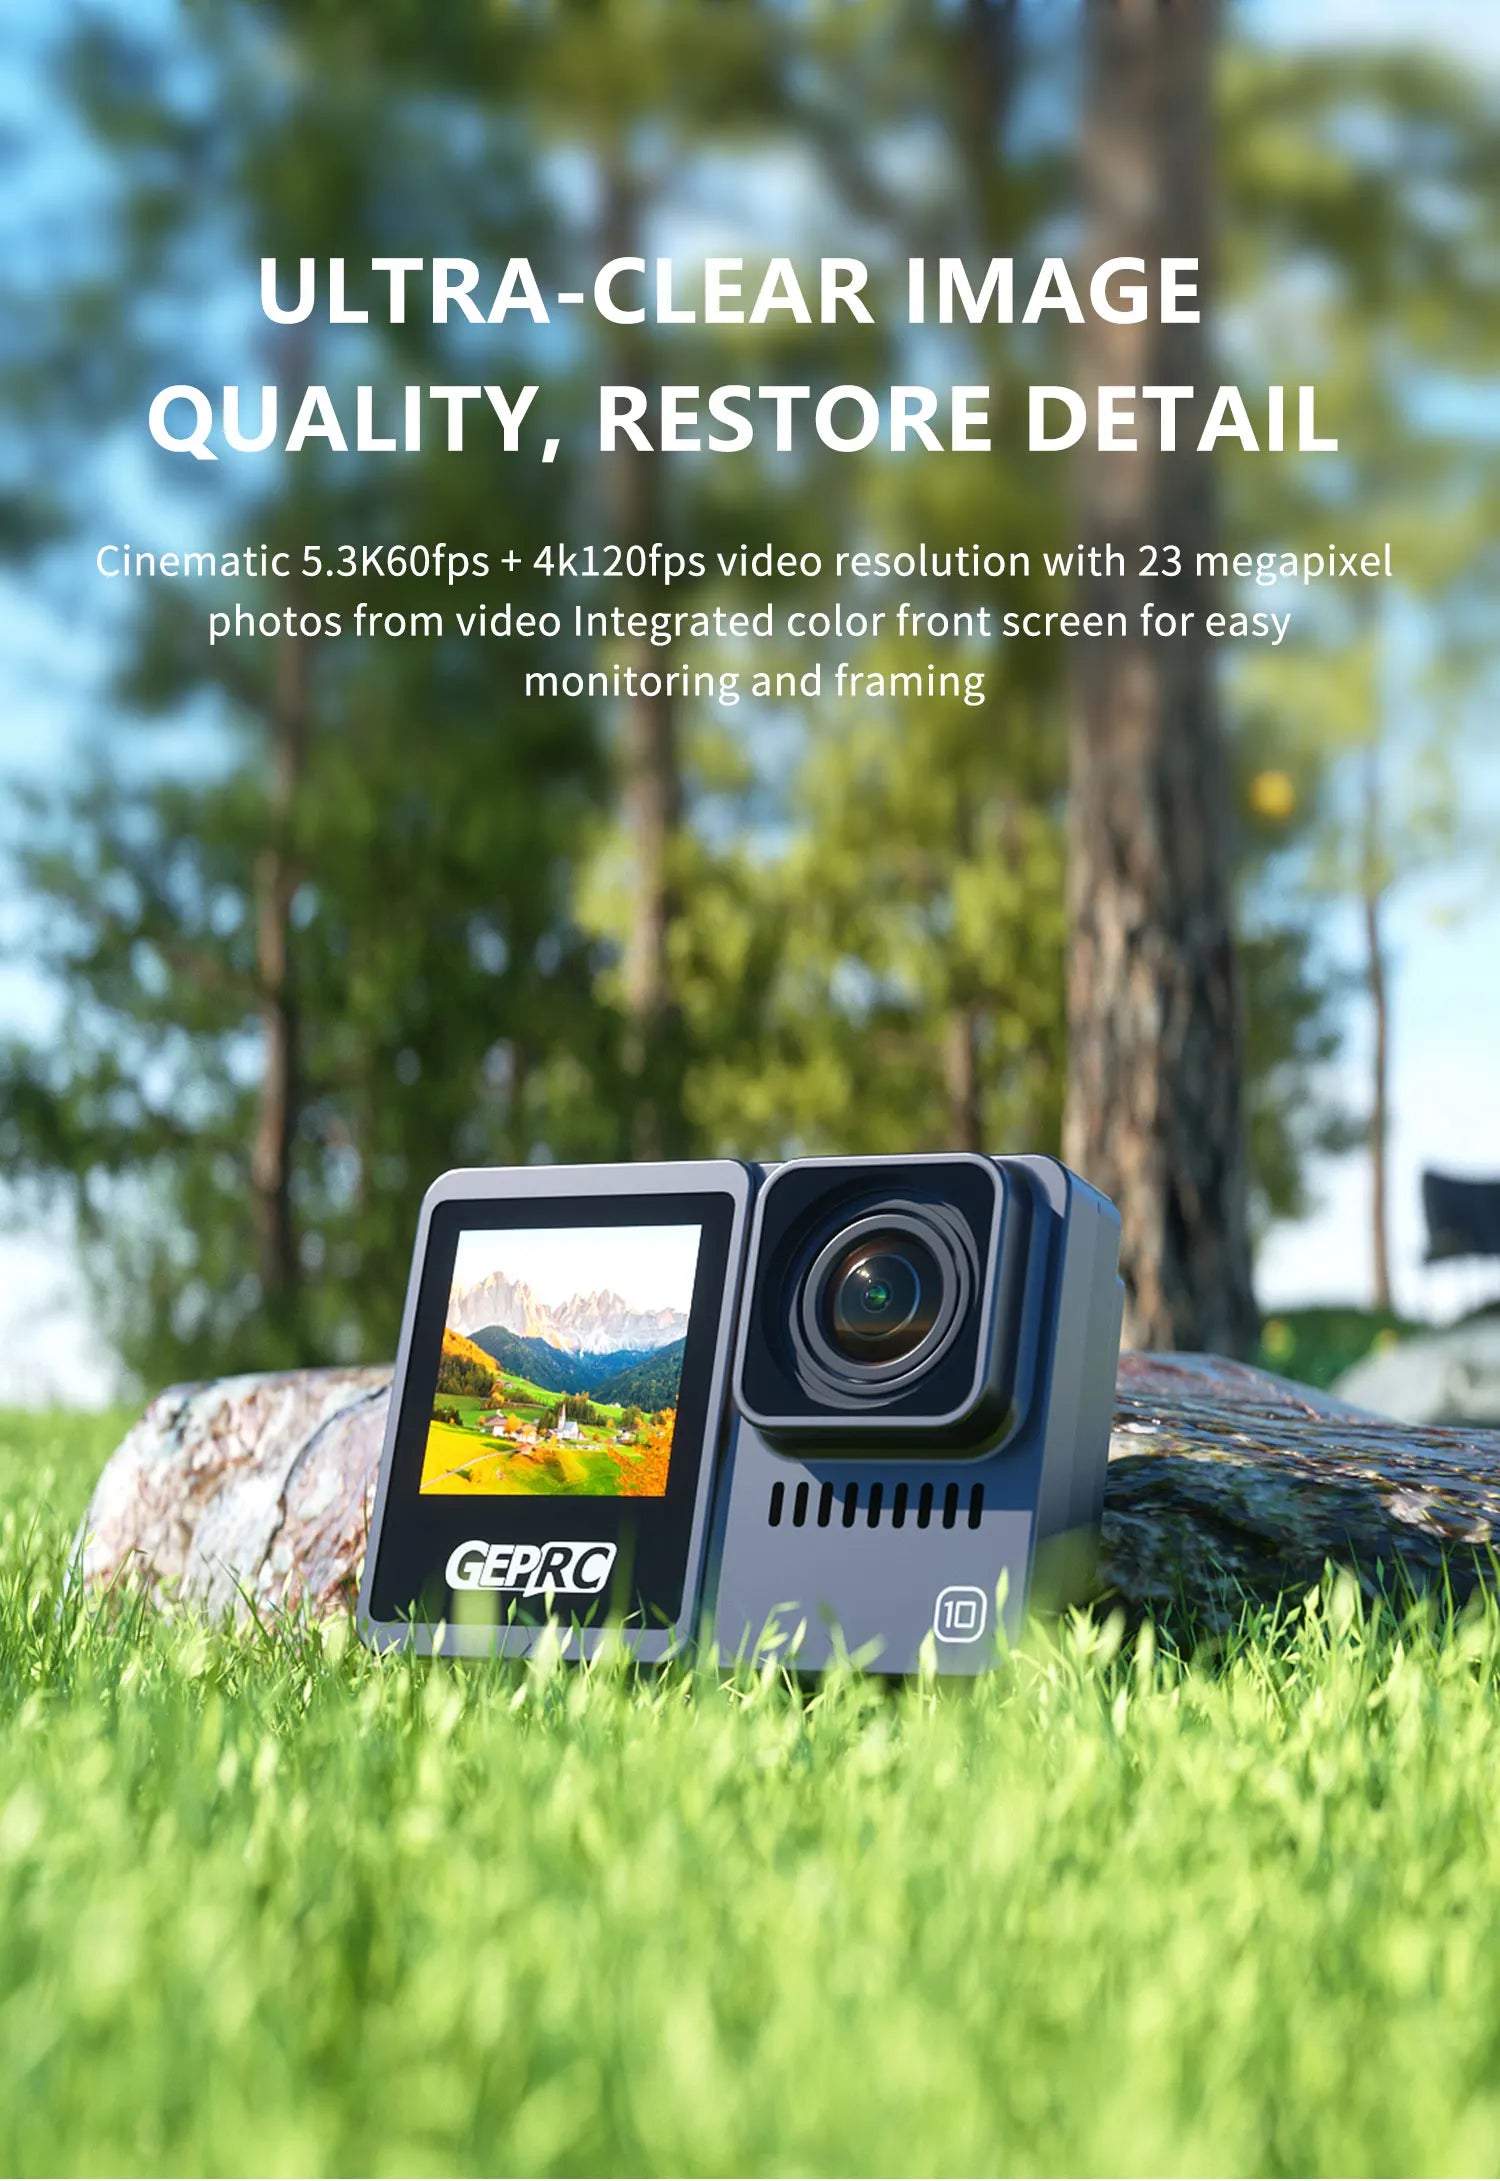 GEPRC Naked Camera, ULTRA-CLEAR IMAGE QUALITY, RESTORE DETAIL